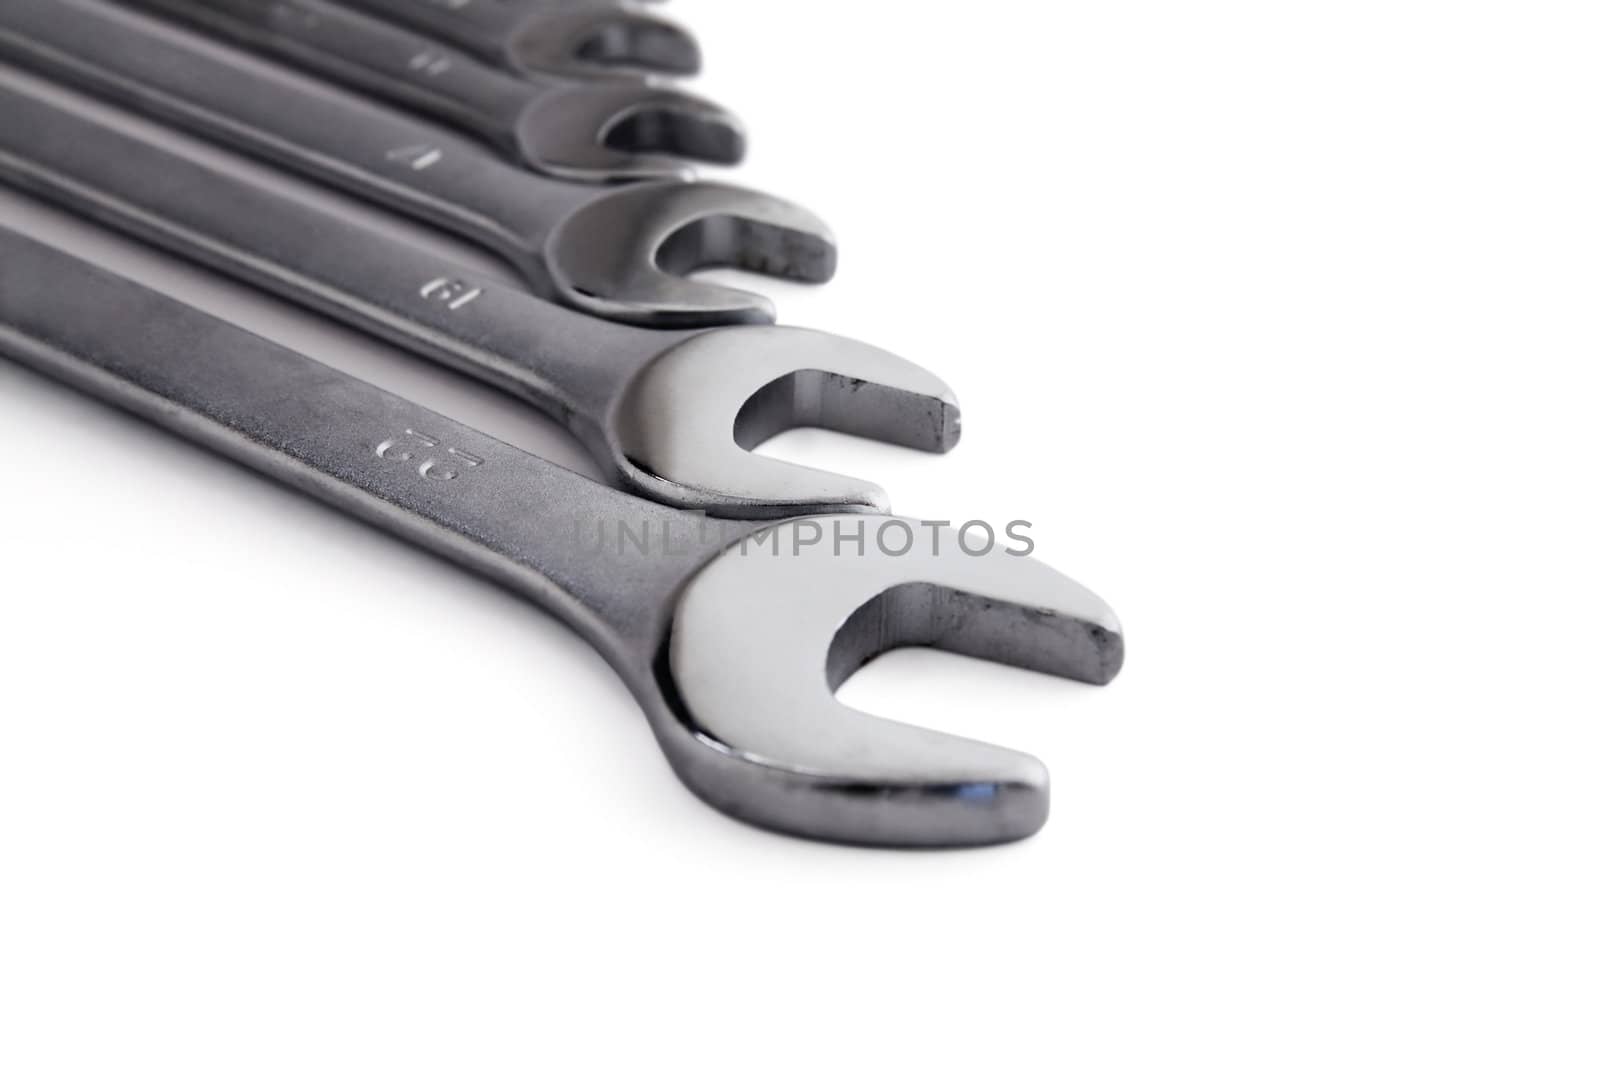 Industrial working tools on a white background